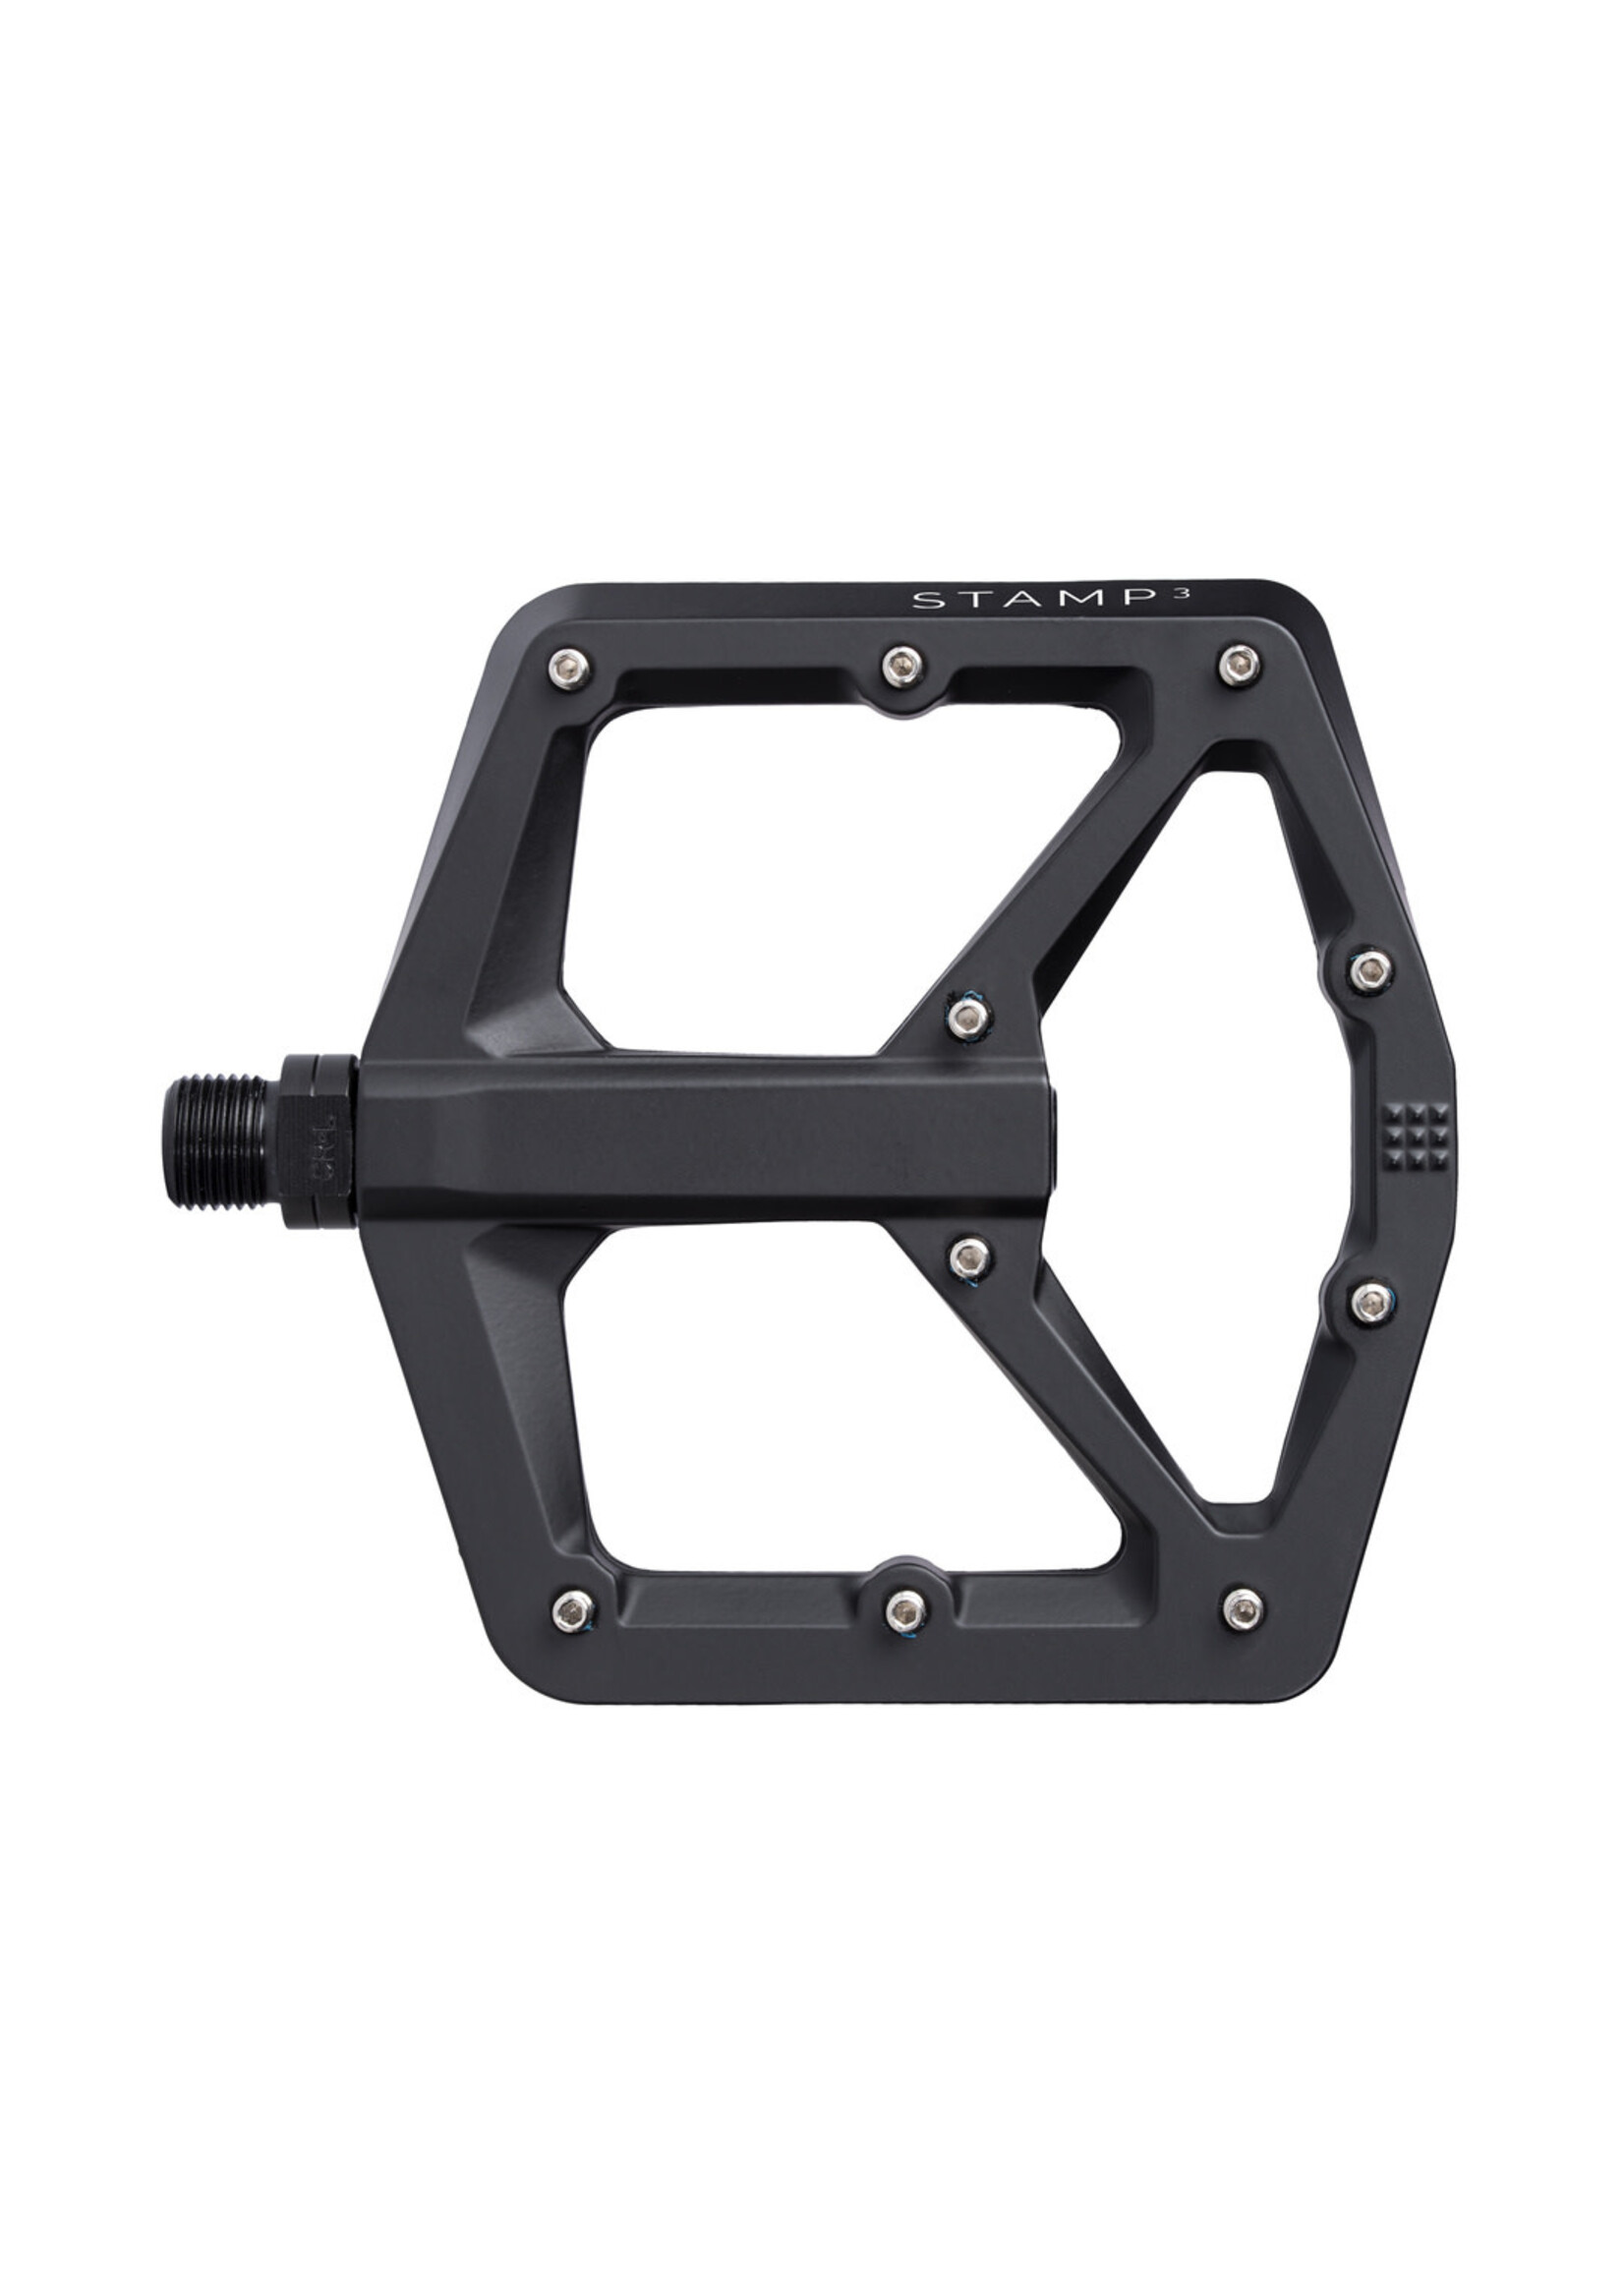 CRANK BROTHERS Pedal Stamp 3 Mg - Large black